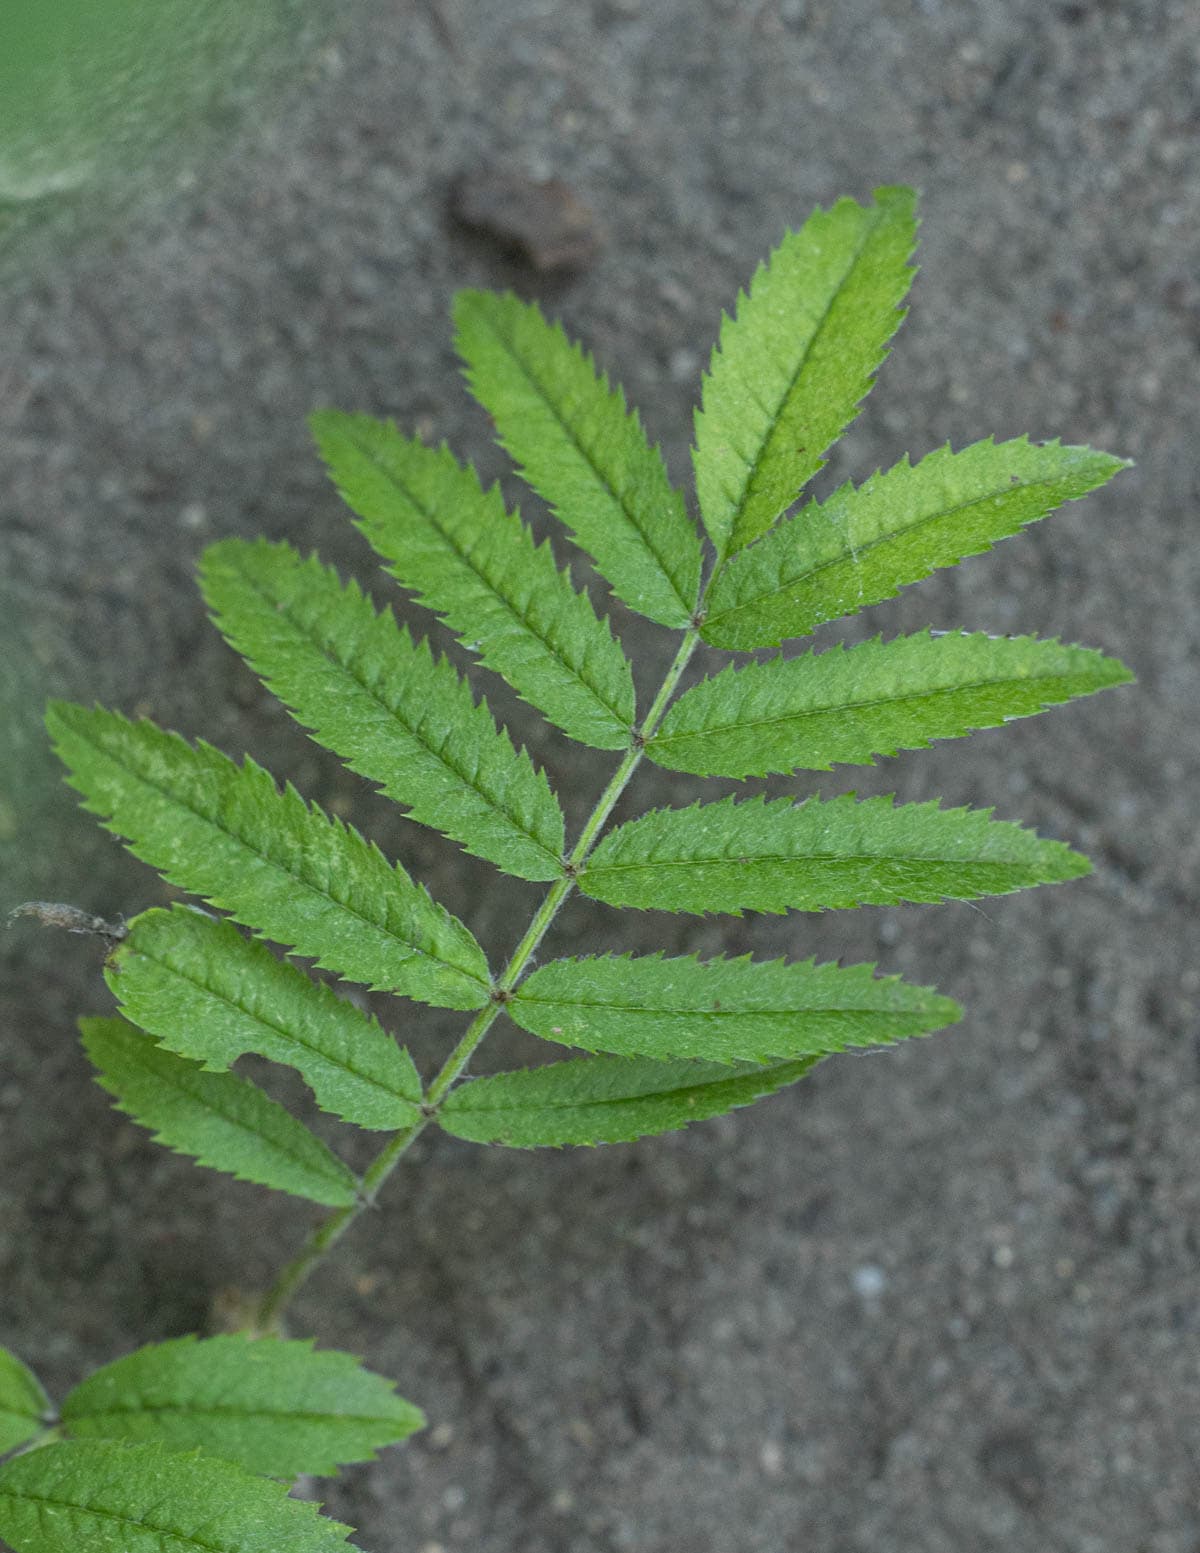 Close up image of the leaves of a rowan tree showing teeth on the edges. 